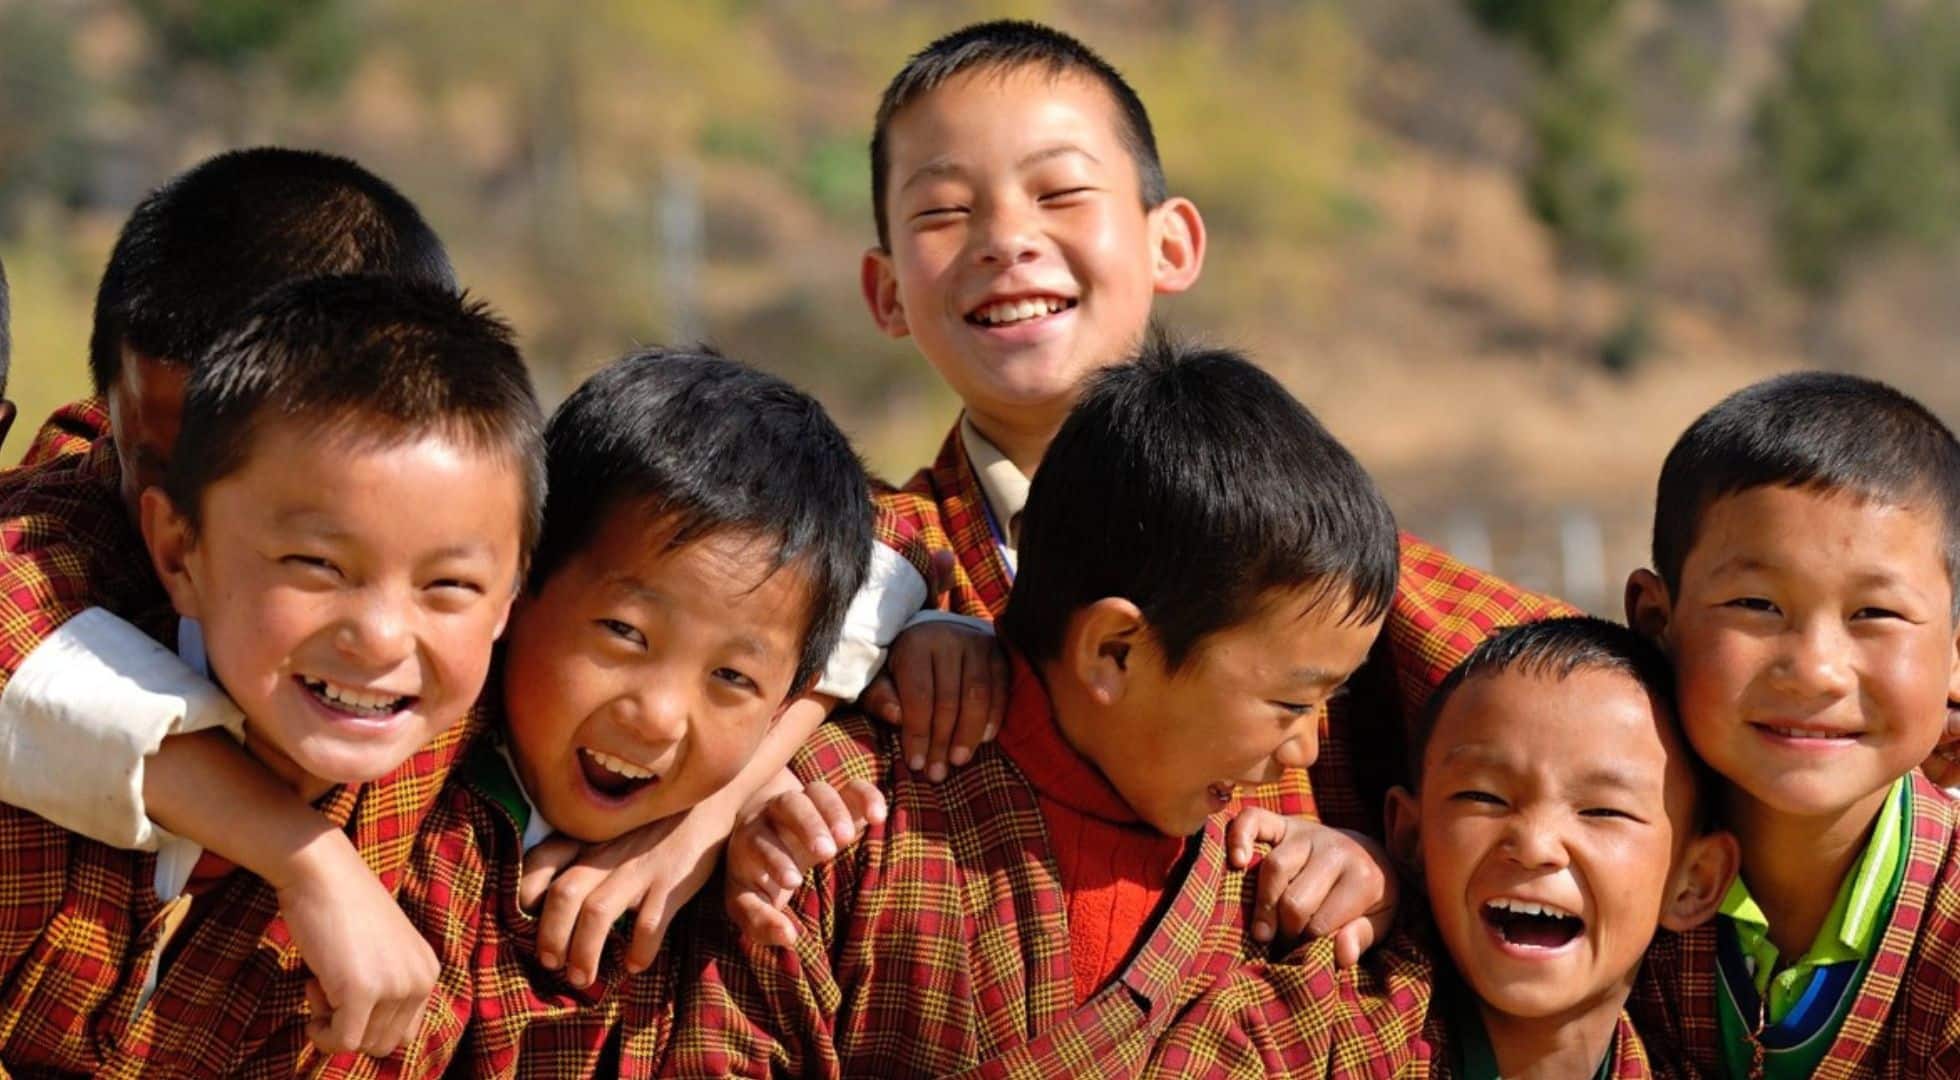 Bhutanese are warm and friendly